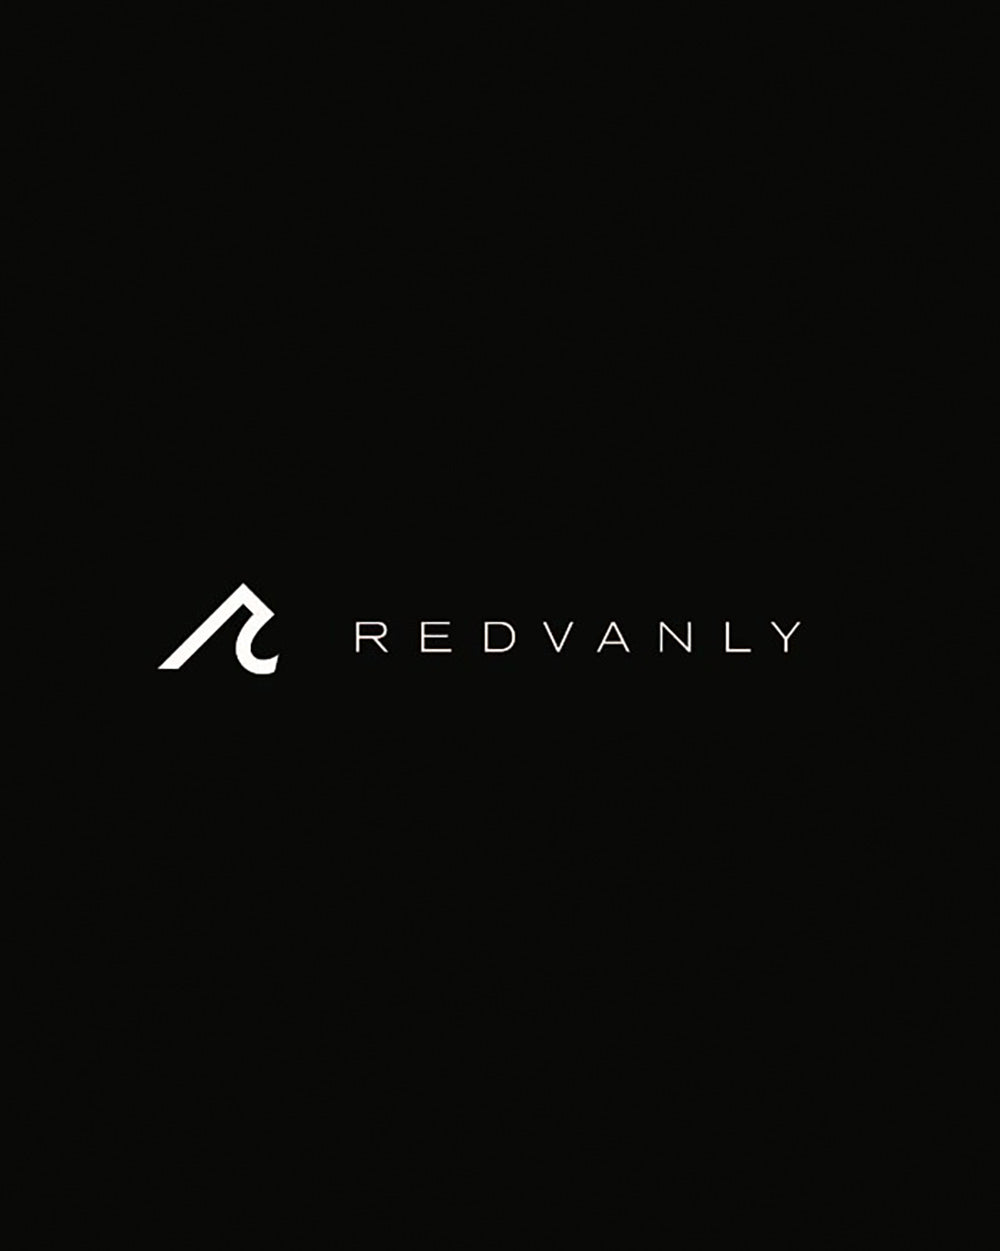 Image of the redvanly gift card